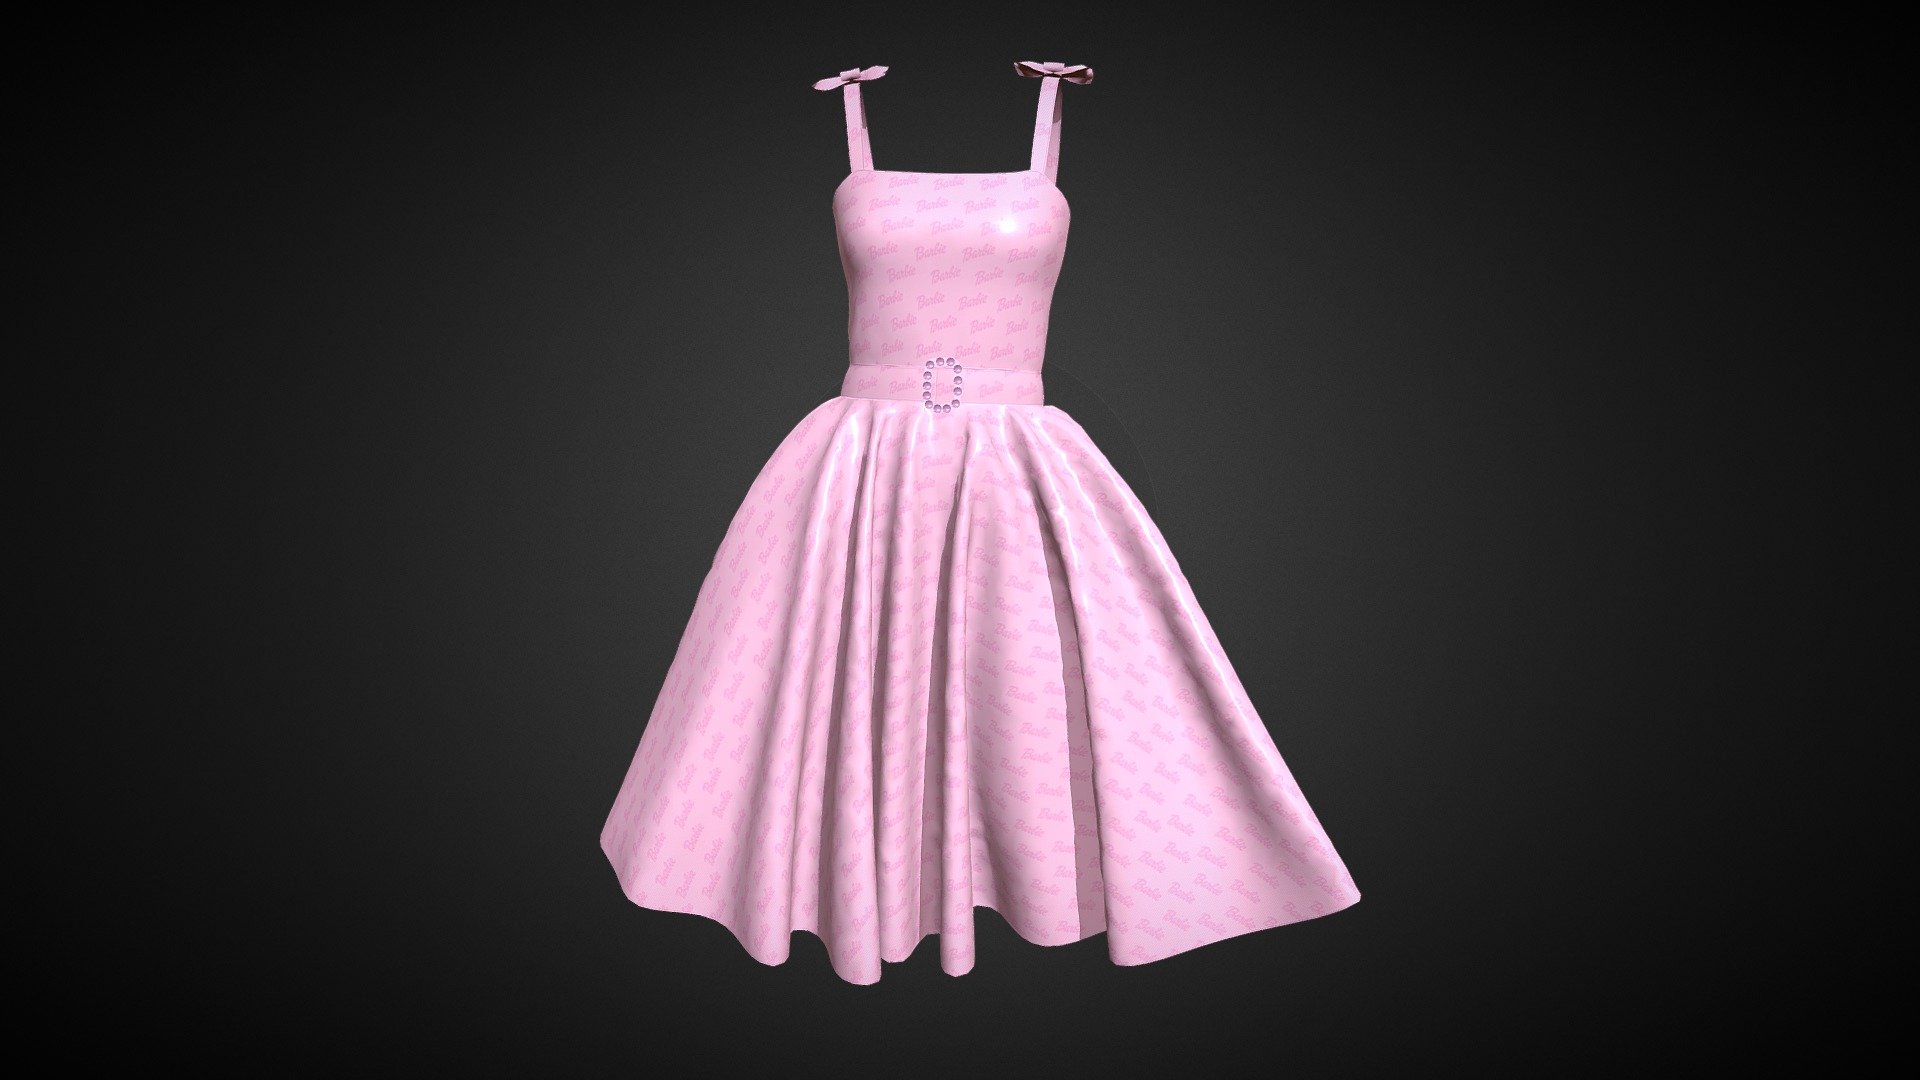 Barbie Dress- Barbie Logo

I am a Professional 3D Fashion/Apprel Designer. I have 7 years working experience about 3D Fashion. I am working with Clo3d, Marvelous Designer (MD), Daz3d, Blender, Cinema4d, Etc.

Features:
1.  2k UV Texture
2.  Triangle mesh
3.  Textures with Non-overlapping UV Map (2048x2048 Pixels)
4.  In additonal Textures folder have diffuse,displacement,metalness,normal,opacity,roughness maps.

Attachment Fils:
Exported Files (All are exported in DAZ Studio scale)
* OBJ
* FBX
* Marvelous Designer/Clo3d file (zprj)

Thanks 3d model